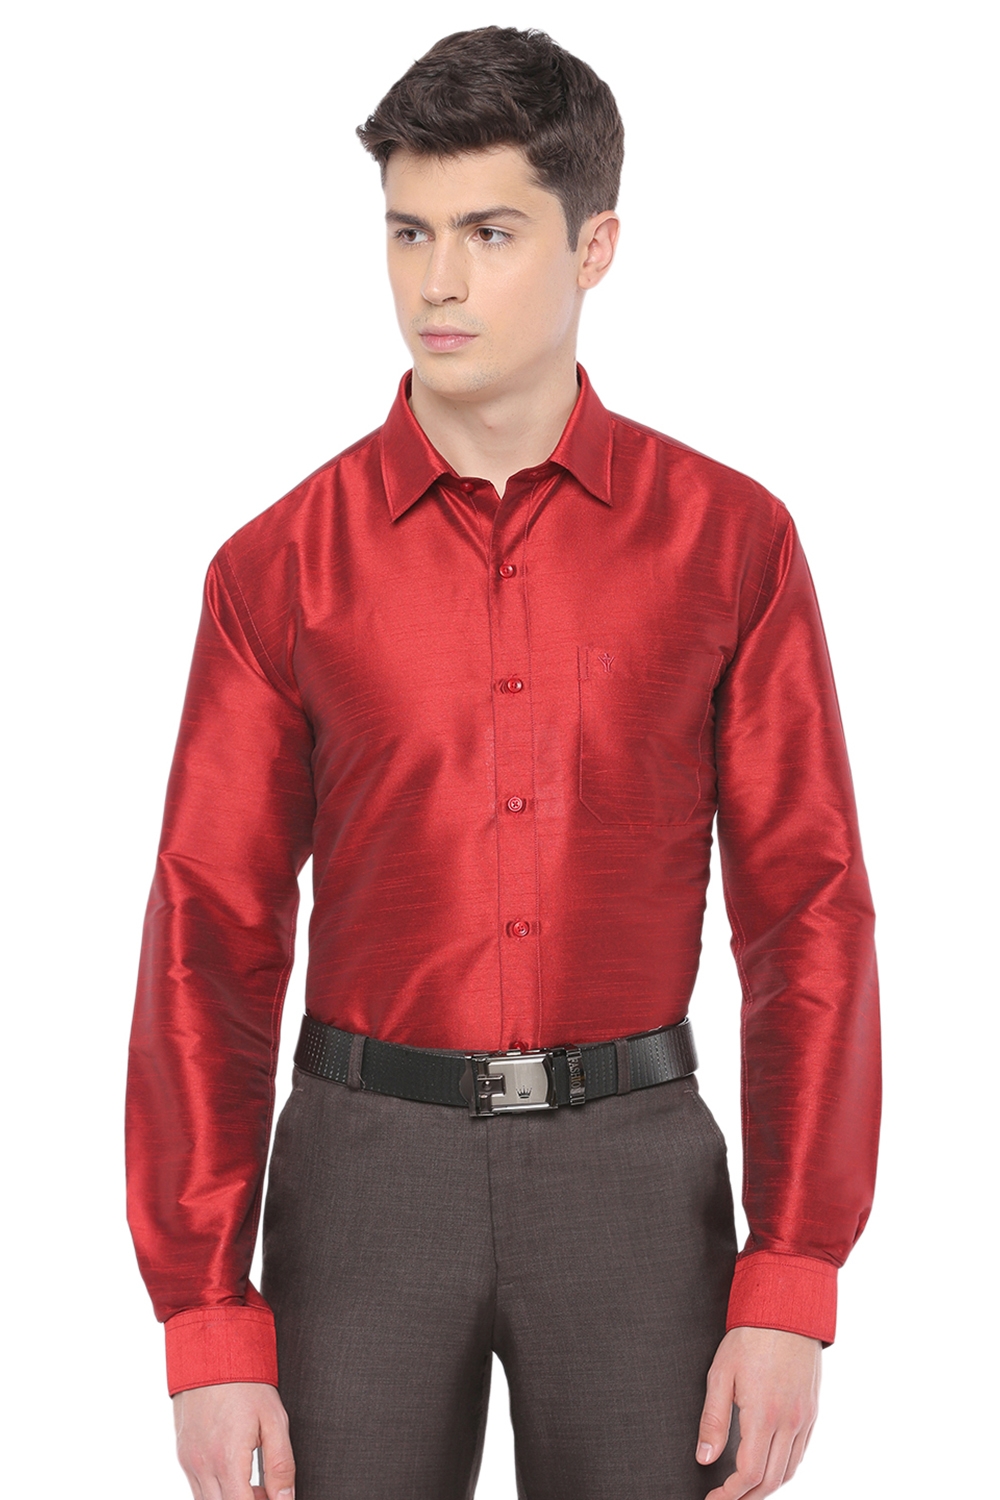 Ramraj Cotton | Red Solid Casual Shirts